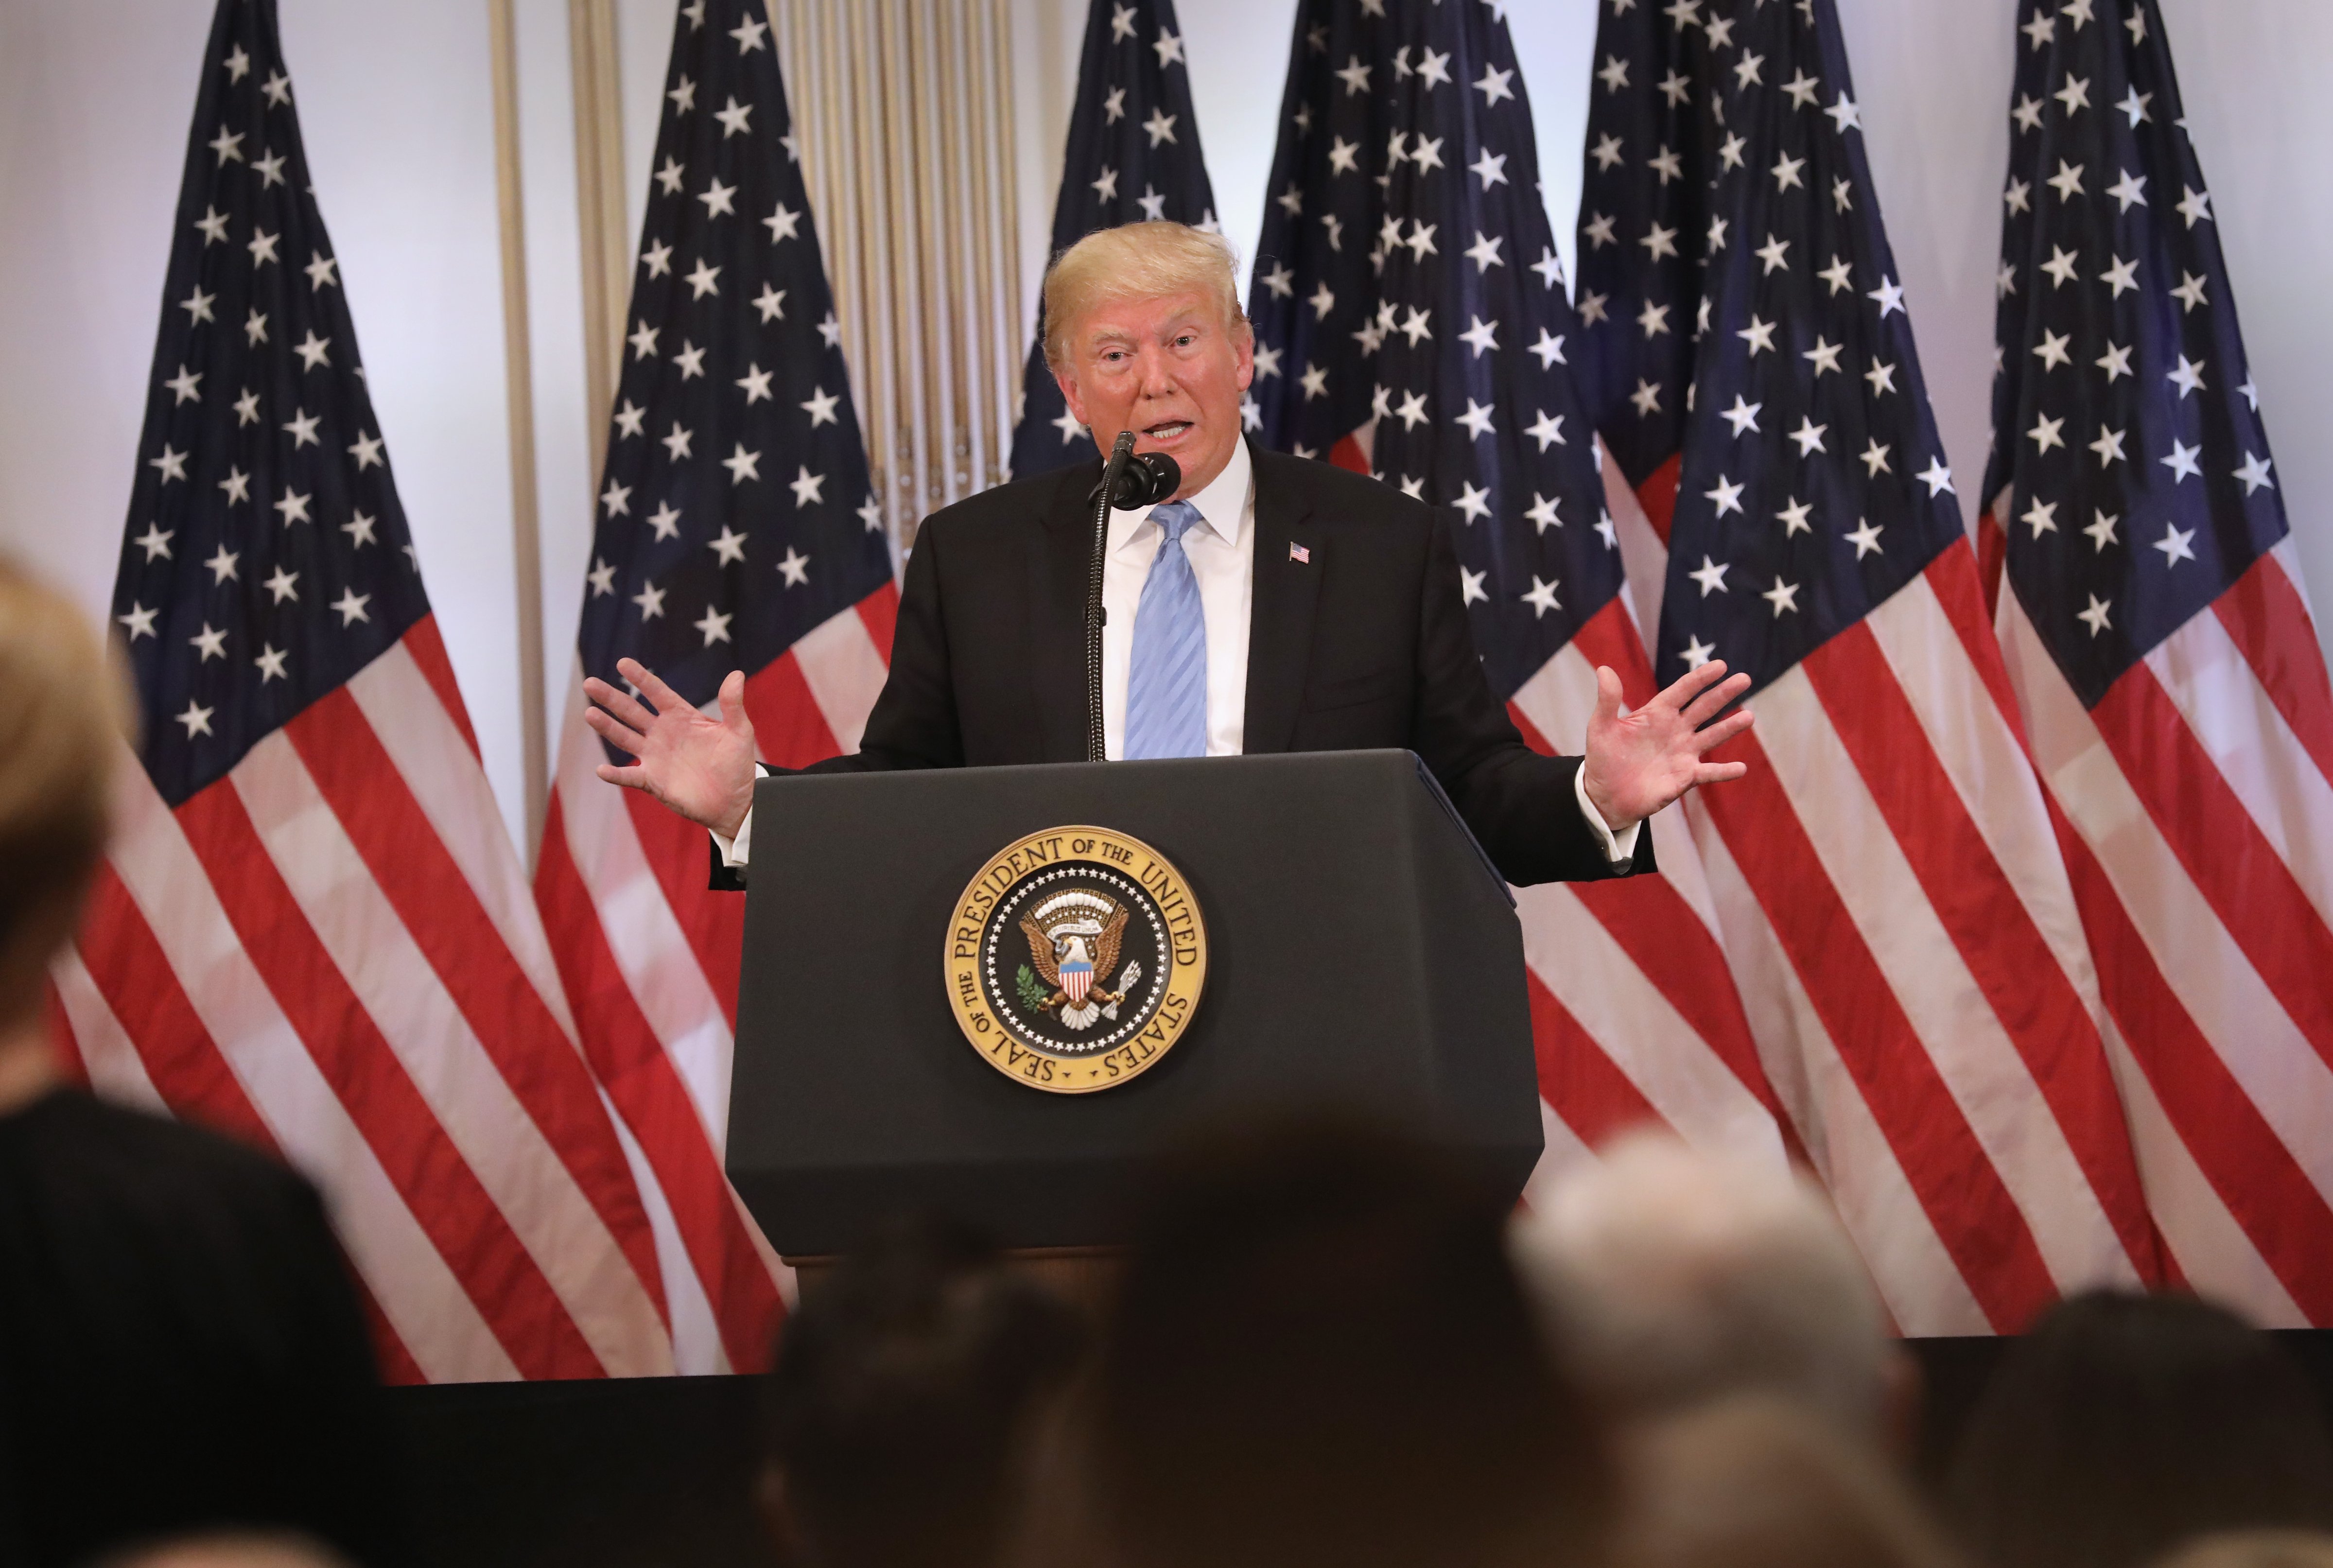 U.S. President Donald Trump answers questions at a press conference on September 26, 2018 in New York City. (John Moore—Getty Images)